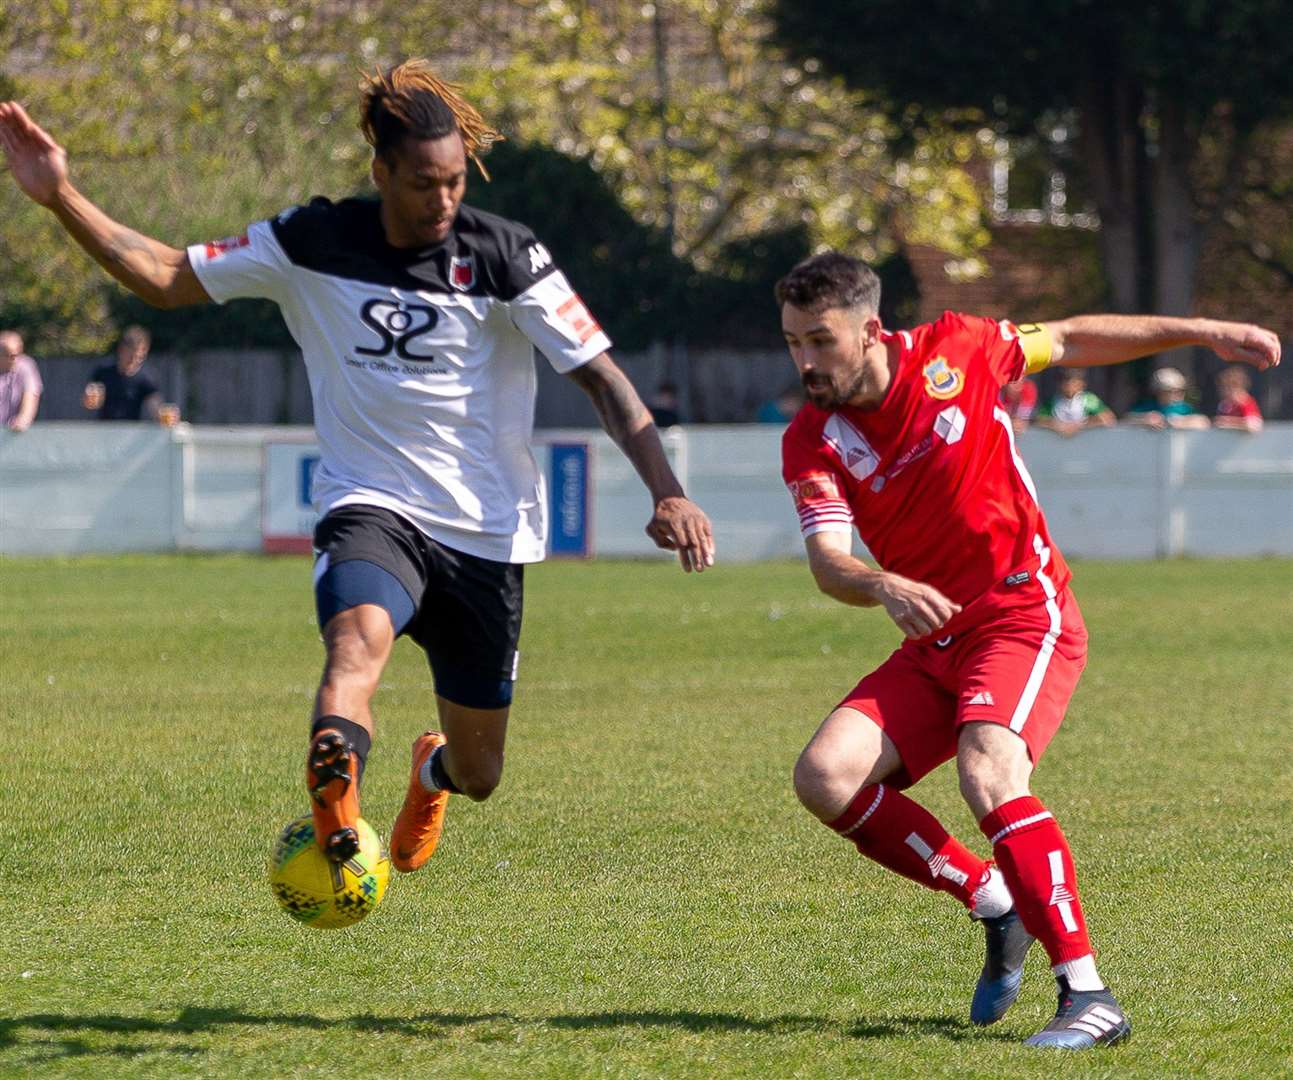 Tom Mills cuts behind Tyrell Richardson-Brown during Saturday's 1-0 home loss for Whitstable. Picture: Les Biggs